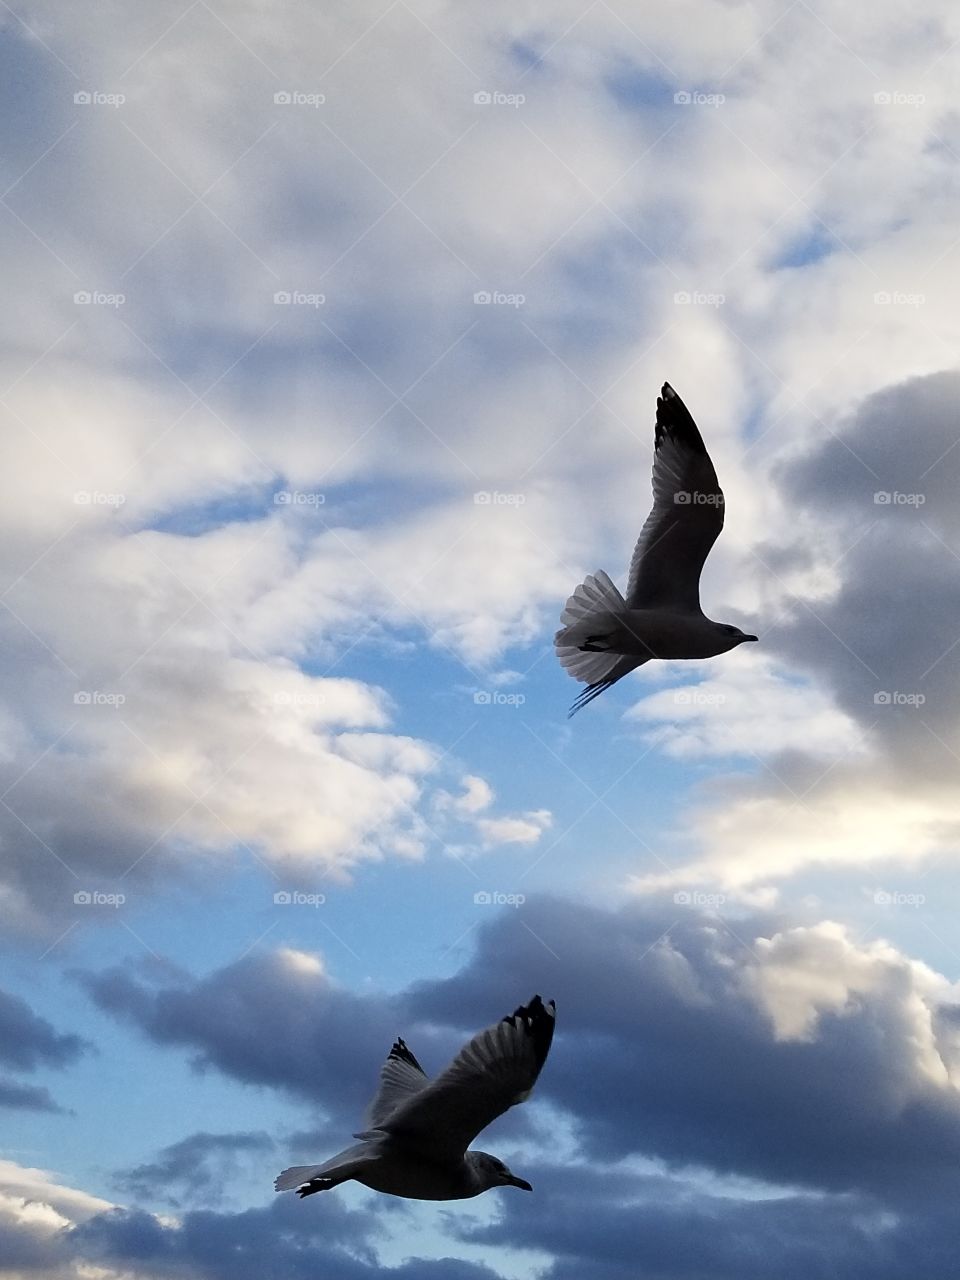 For such a "dirty bird", these Seagulls, are gorgeous taking flight on a dock of the Chesapeake.